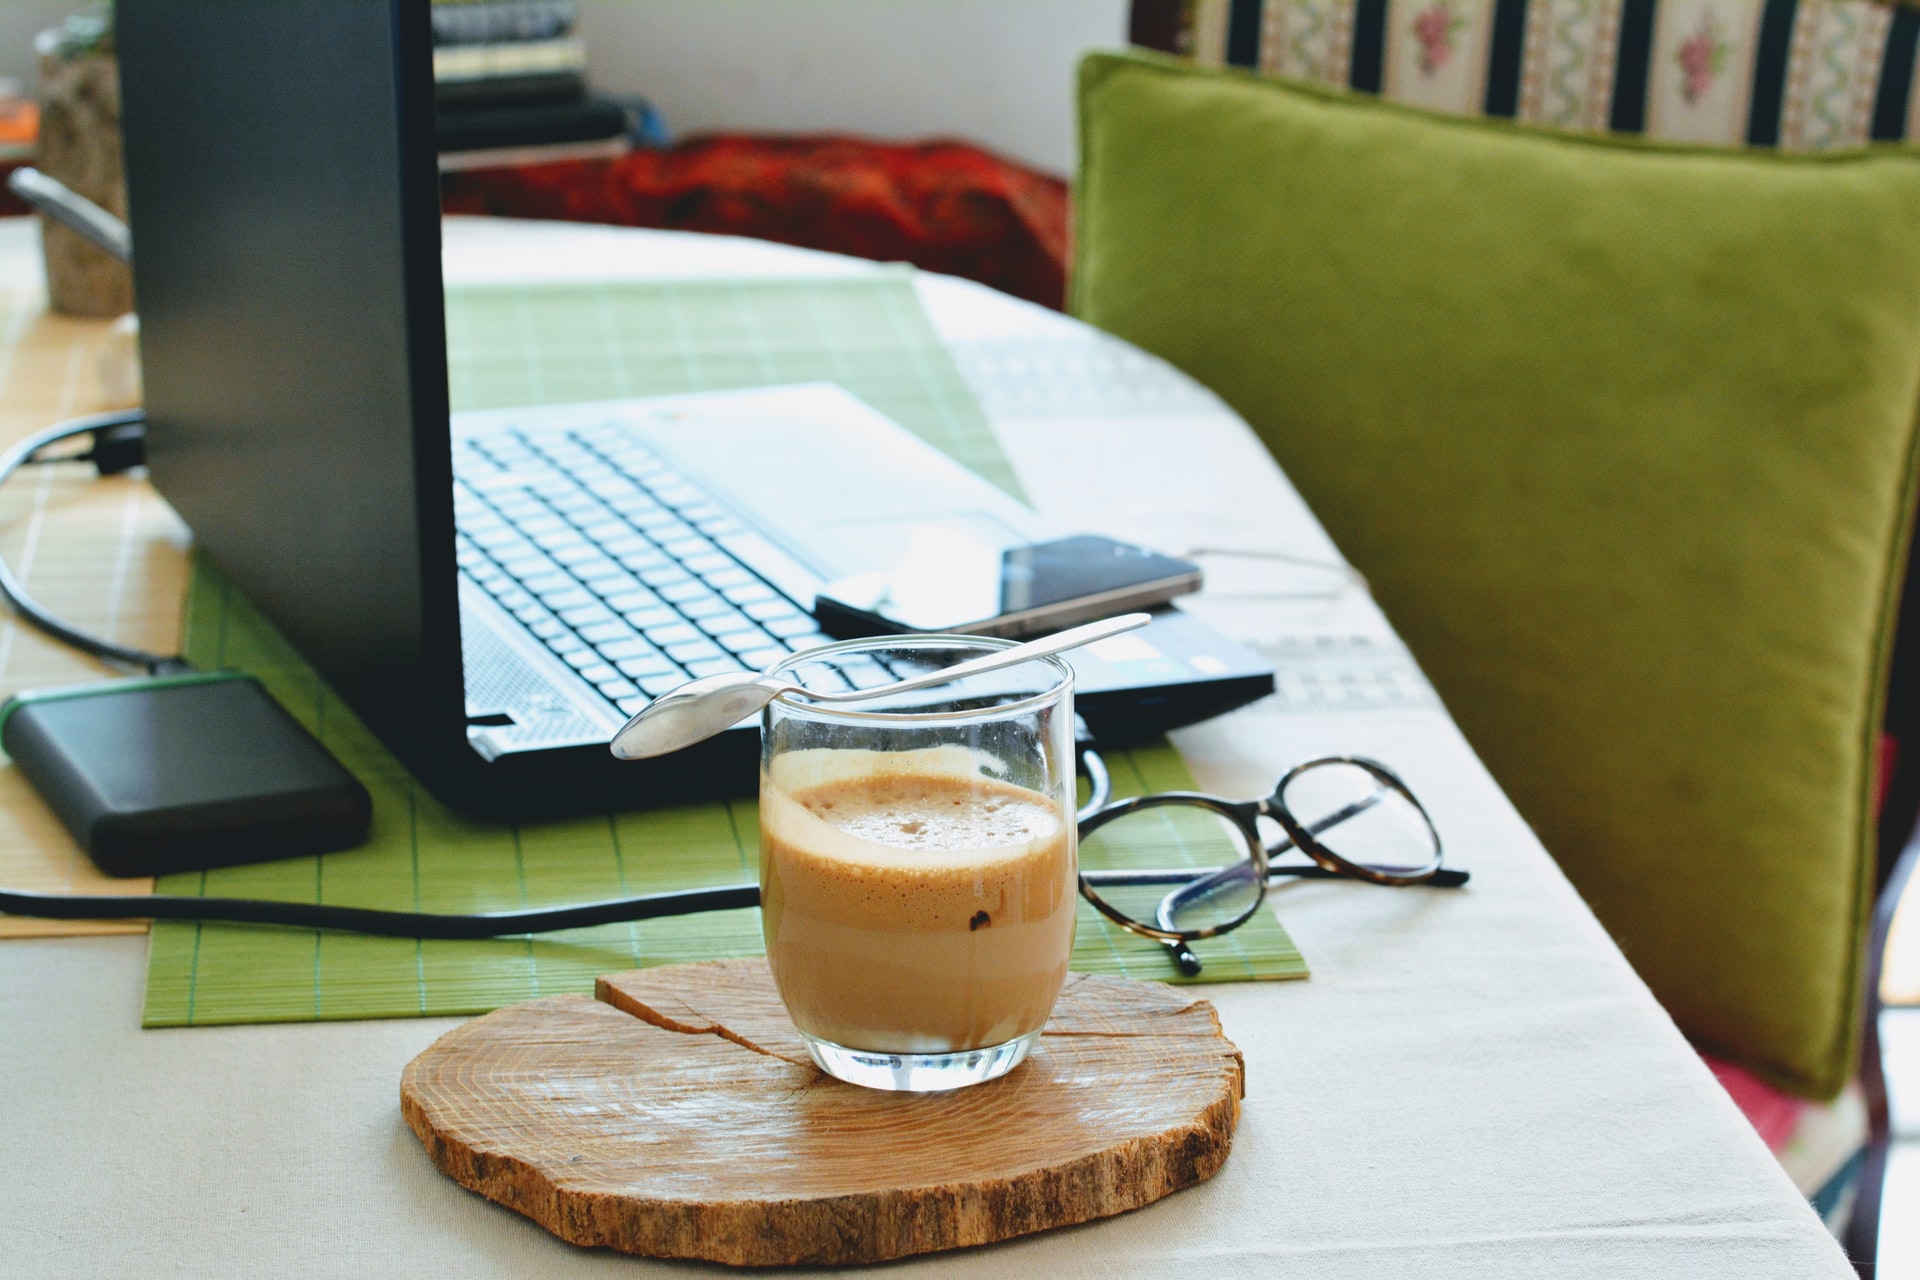 7 Tips for Negotiating a Work-from-Home Arrangement with Your Boss